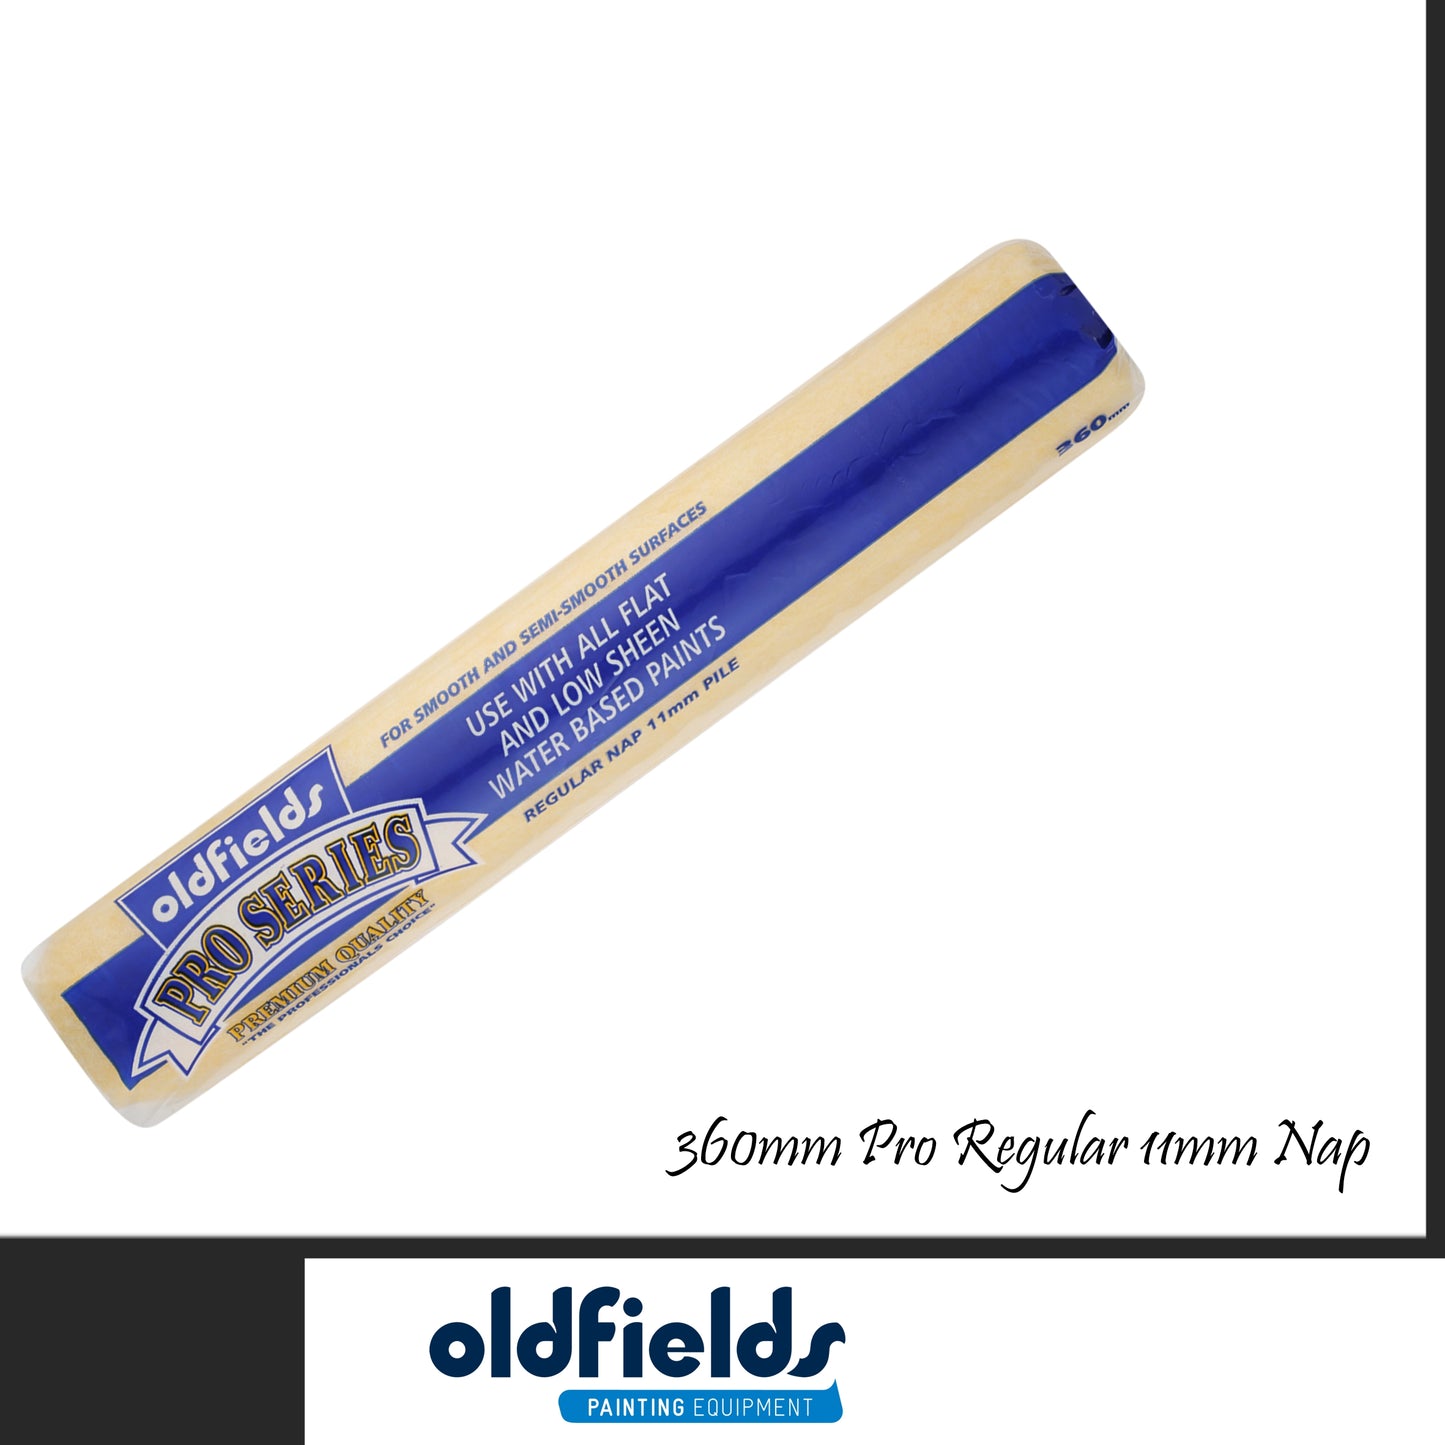 Pro Series Professional 11mm Nap Paint Roller Sleeves from Oldfields